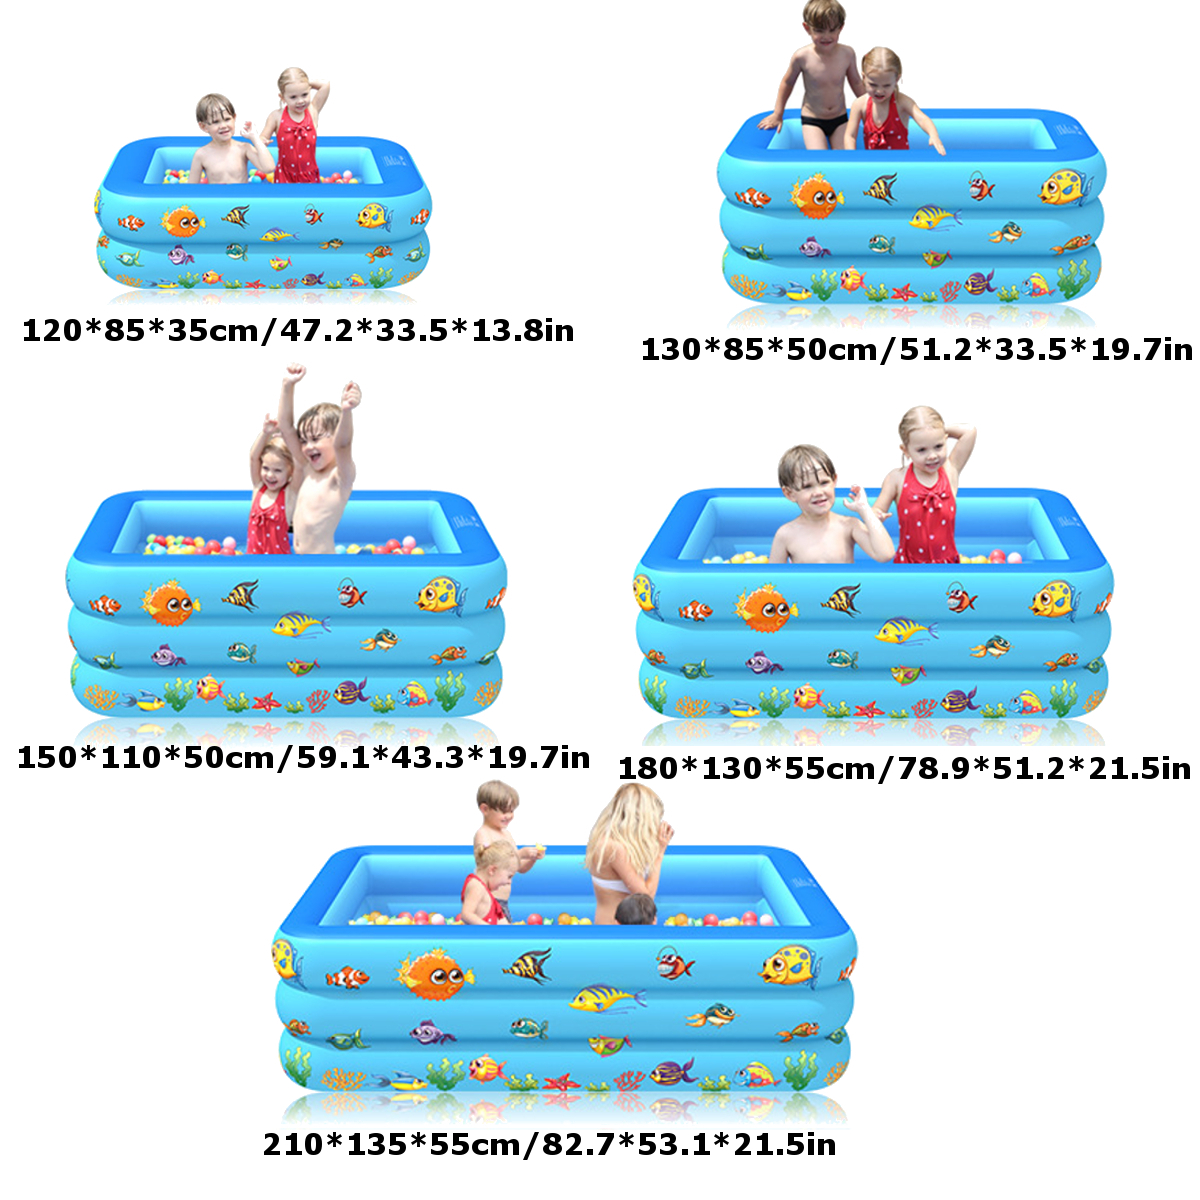 Inflatable-Swimming-Pool-Garden-Outdoor-PVC-Paddling-Pools-Kid-Game-Pool-1707398-7